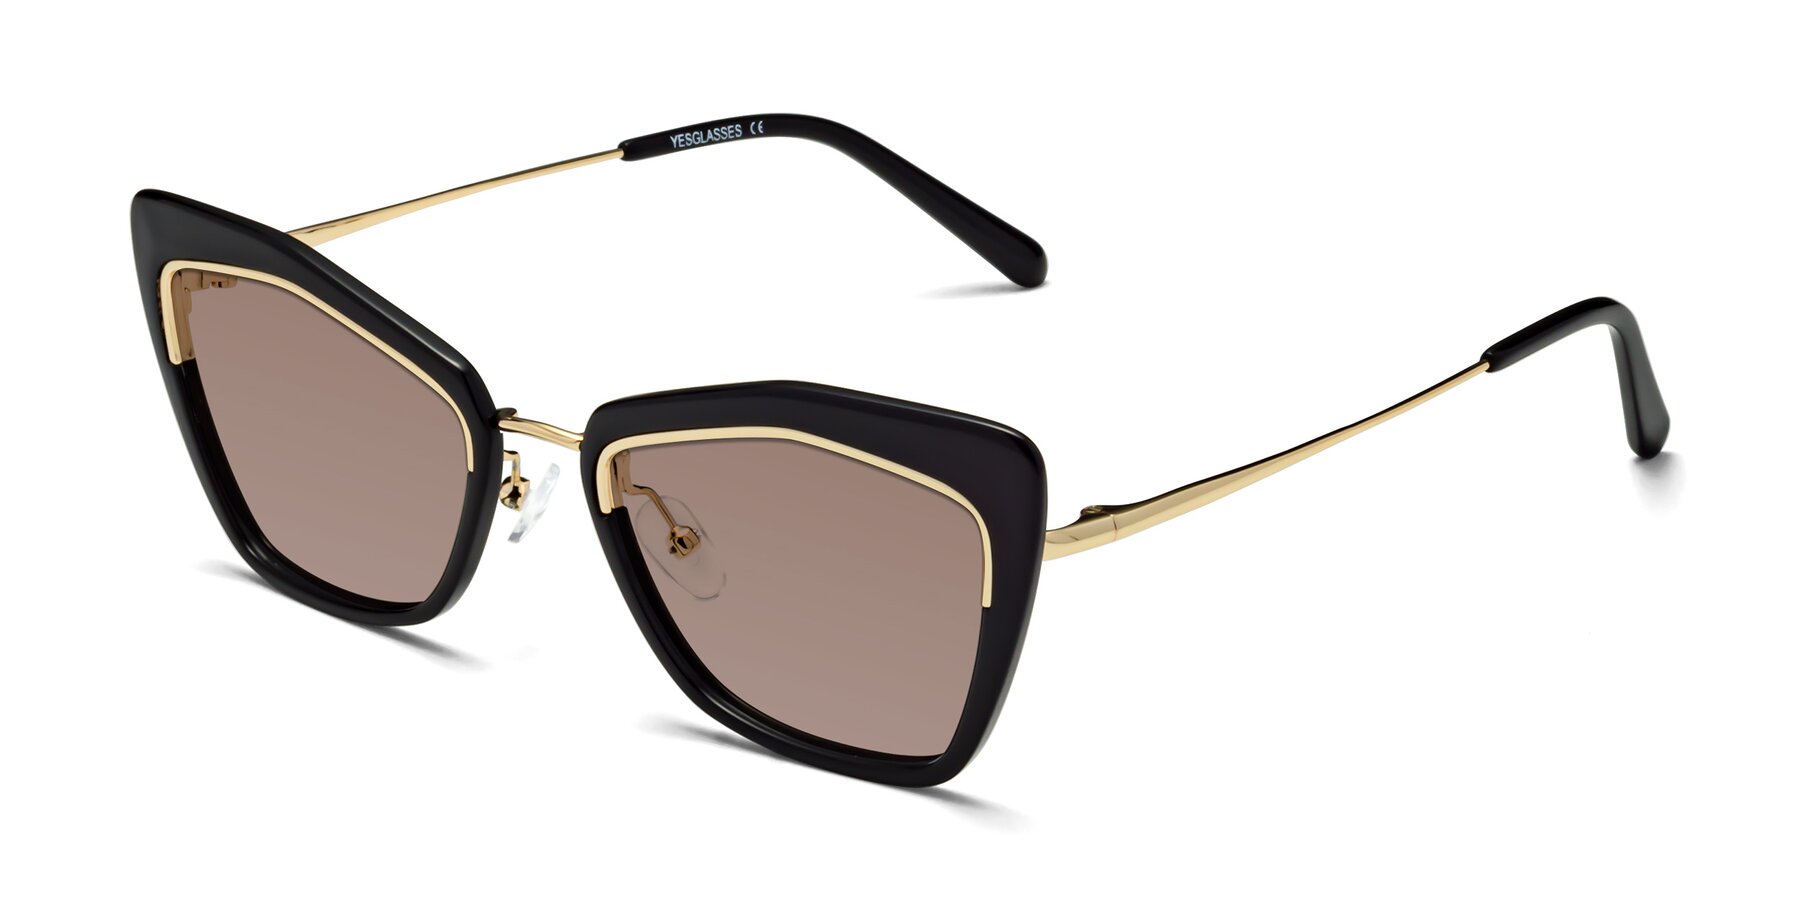 Angle of Lasso in Black with Medium Brown Tinted Lenses